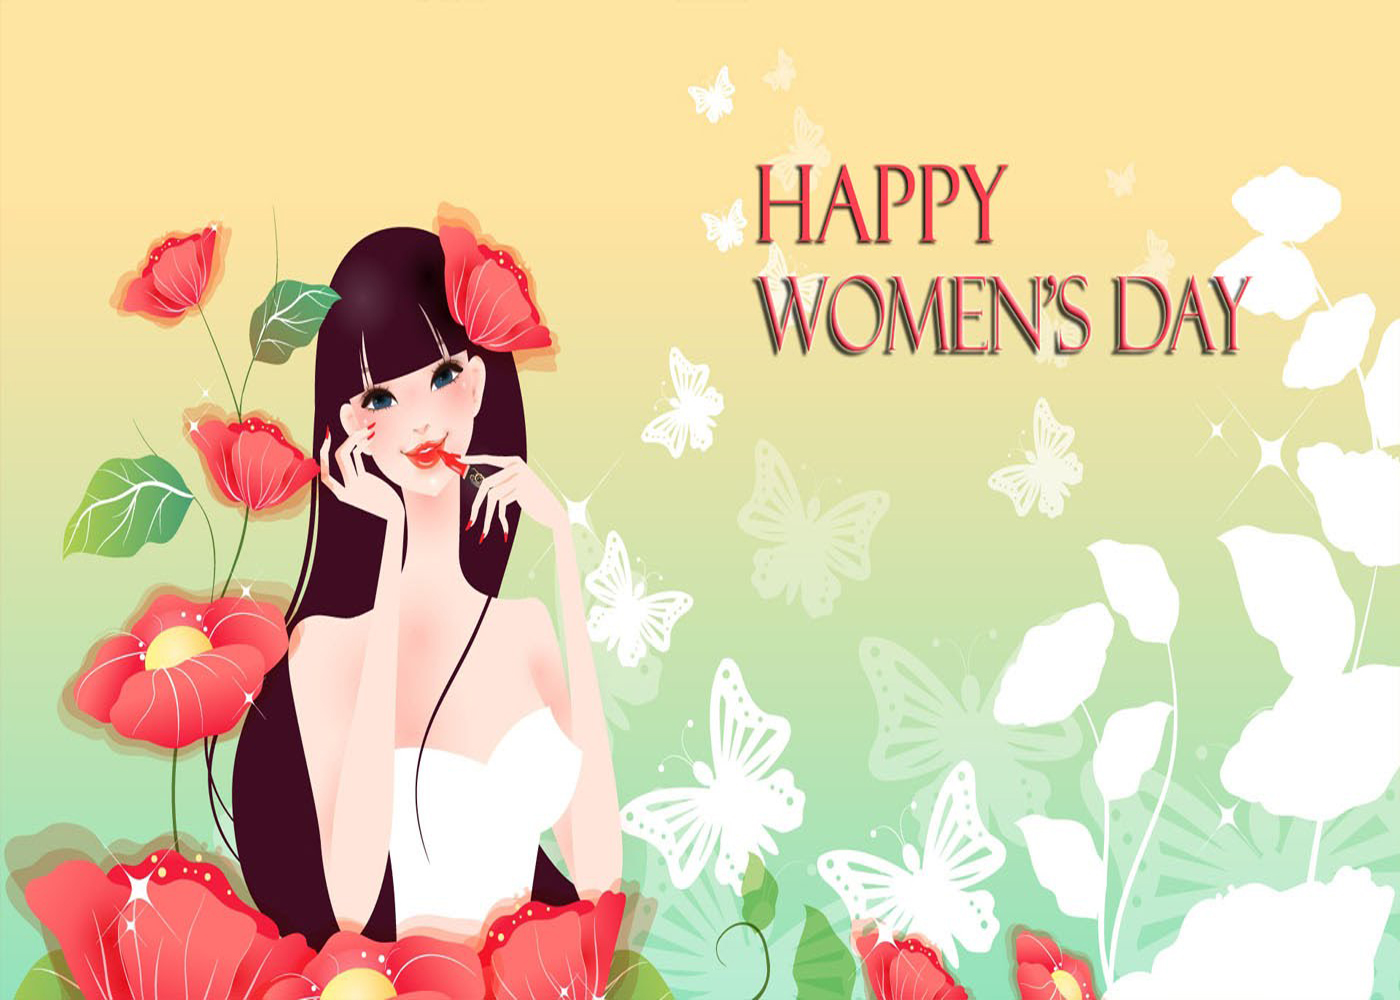 Happy Women's Day Images - Womens Day 2019 Quotes